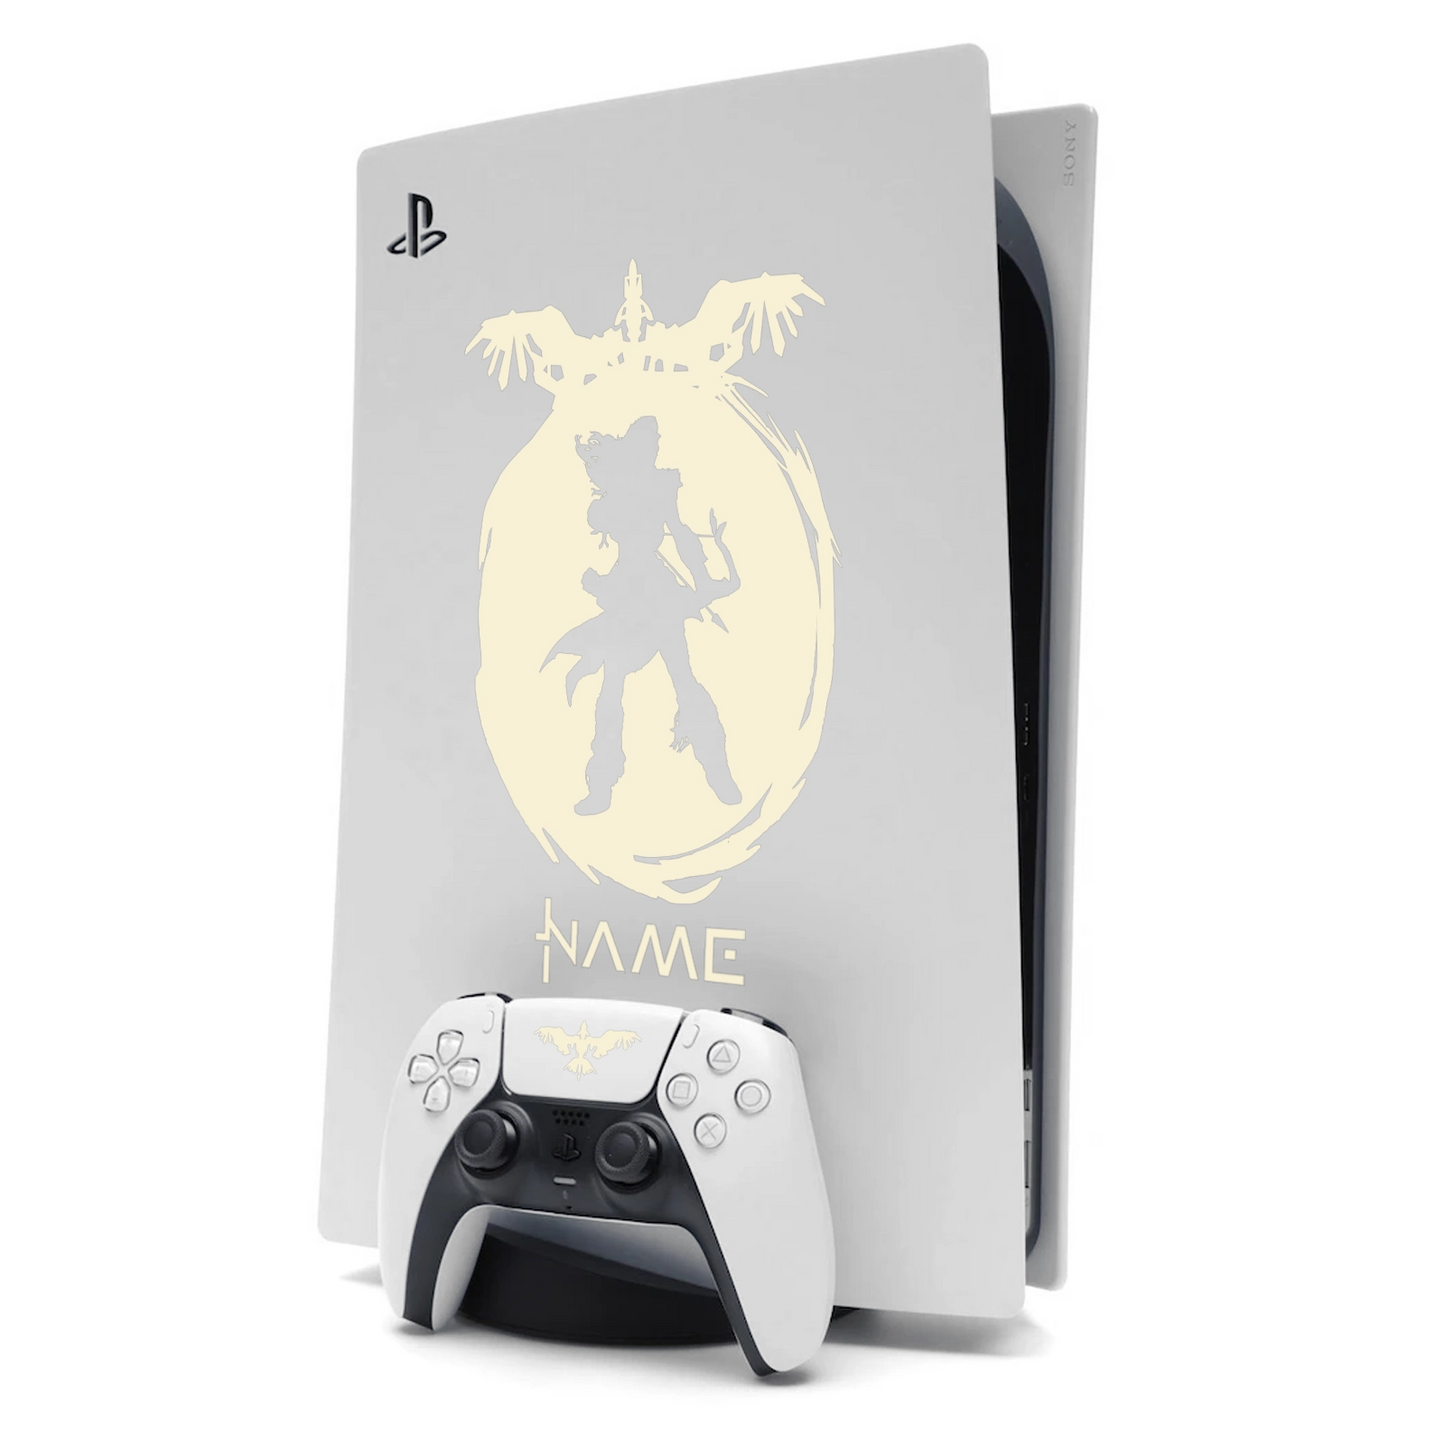 Horizon Aloy PS5 Sticker Skin for Playstation 5 in Cream